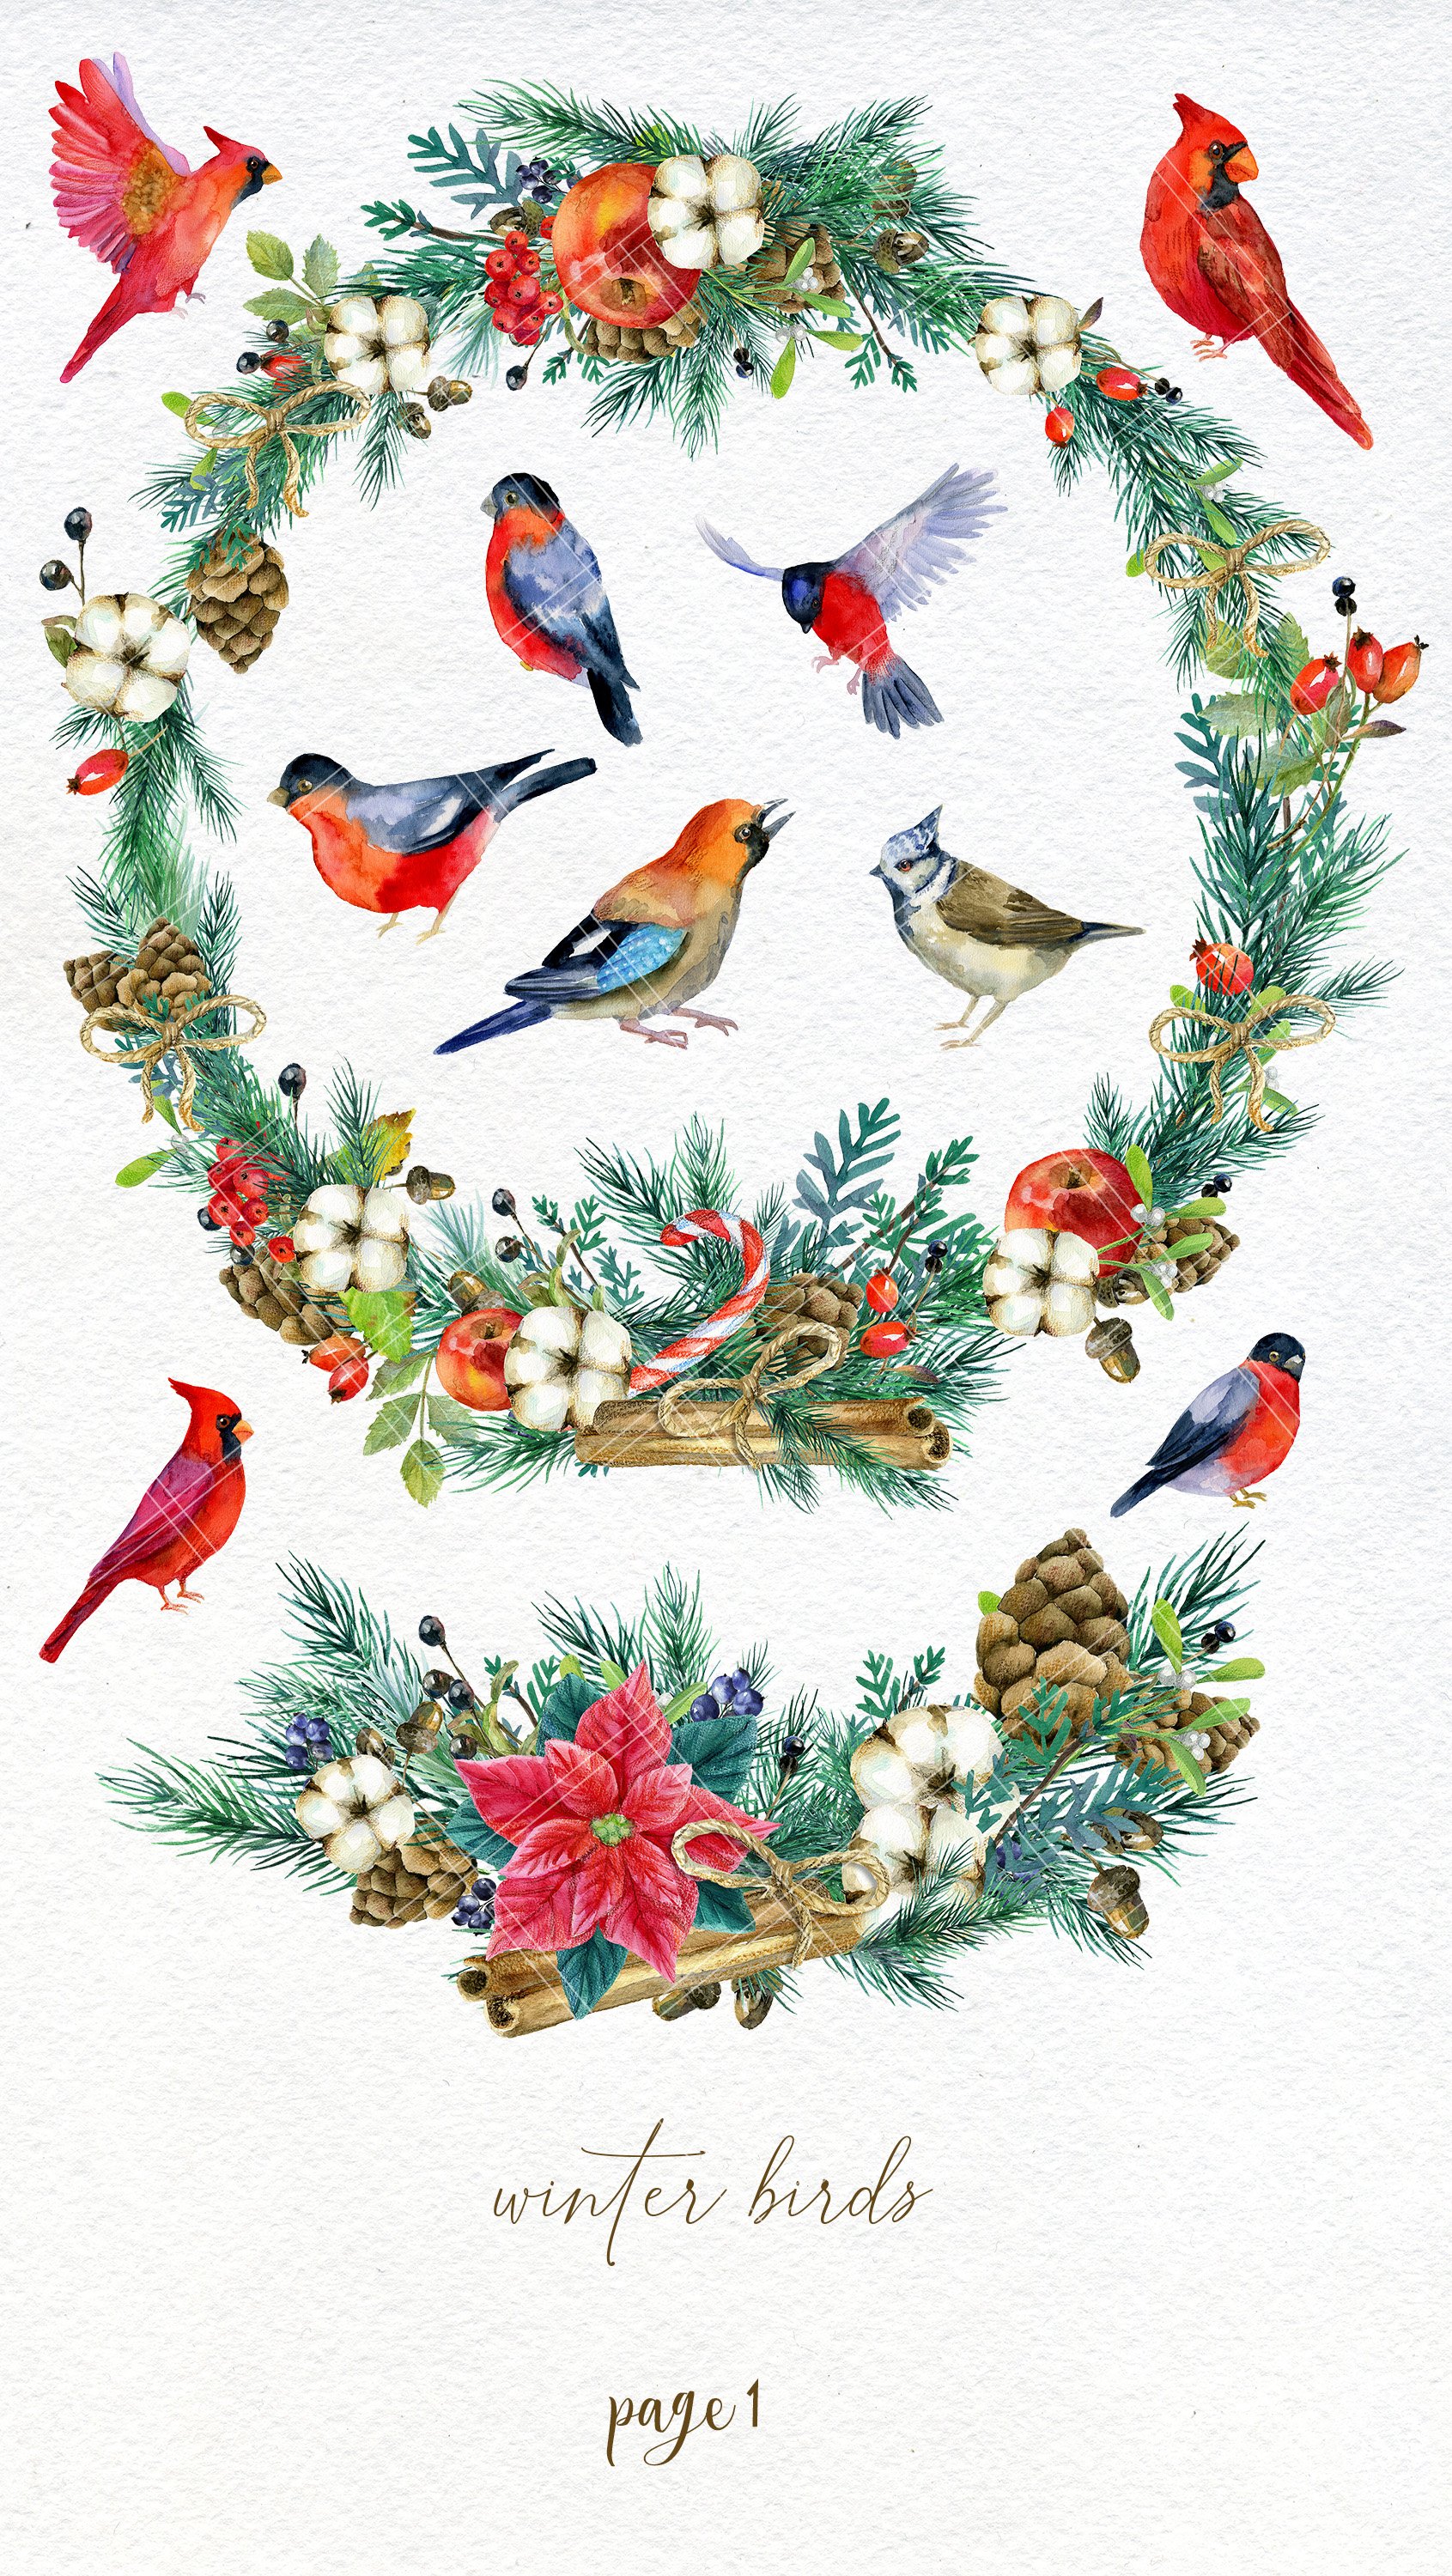 Cool winter birds with wreathes.